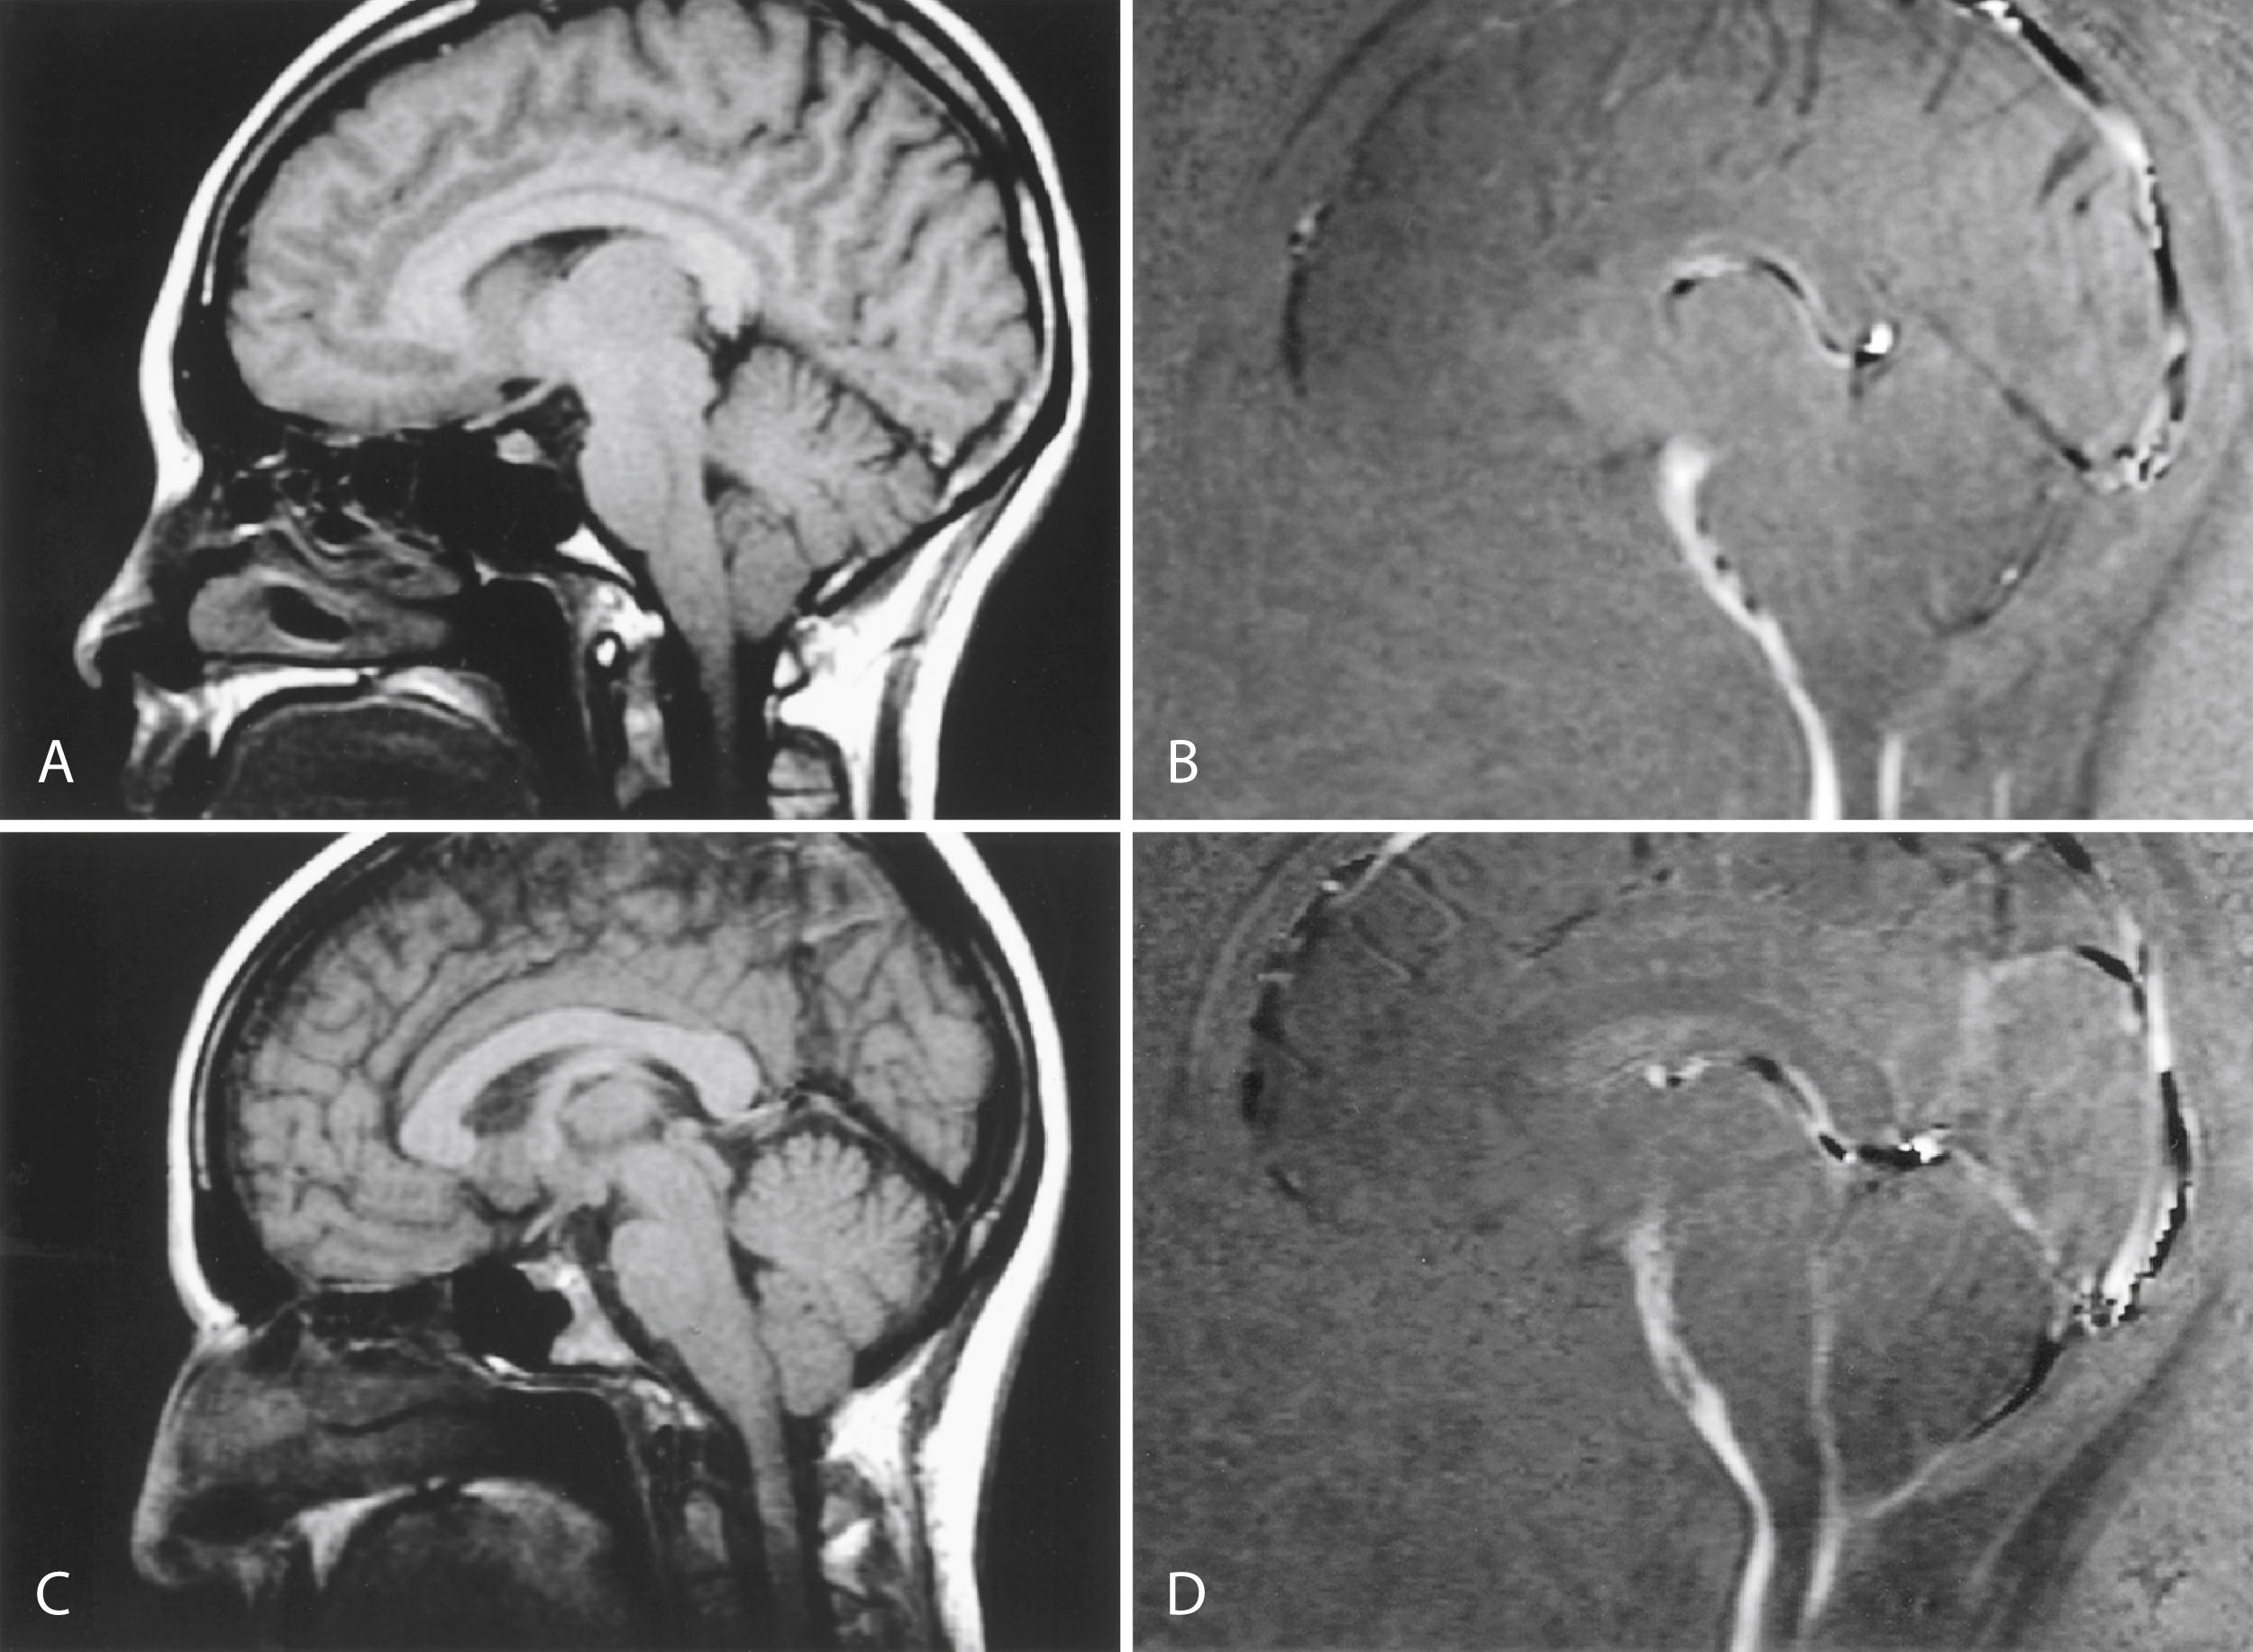 Fig. 104.6, A, Sagittal magnetic resonance imaging (MRI) scan of a patient with Arnold-Chiari type I malformation. Midline T1-weighted image demonstrates low cerebellar tonsils, 8 mm below foramen magnum. B, MRI cerebrospinal fluid (CSF) flow study of same patient demonstrates diminished flow signal at cerebellar tonsils, indicative of CSF flow propagation abnormality. Note normal CSF flow signal below tonsils and anterior to brainstem. C, Sagittal MRI of a patient with low-lying cerebellar tonsils at 6 mm below foramen magnum. D, CSF flow study demonstrating normal flow signal at level of cerebellar tonsils, indicative of normal propagation of CSF flow through foramen magnum.